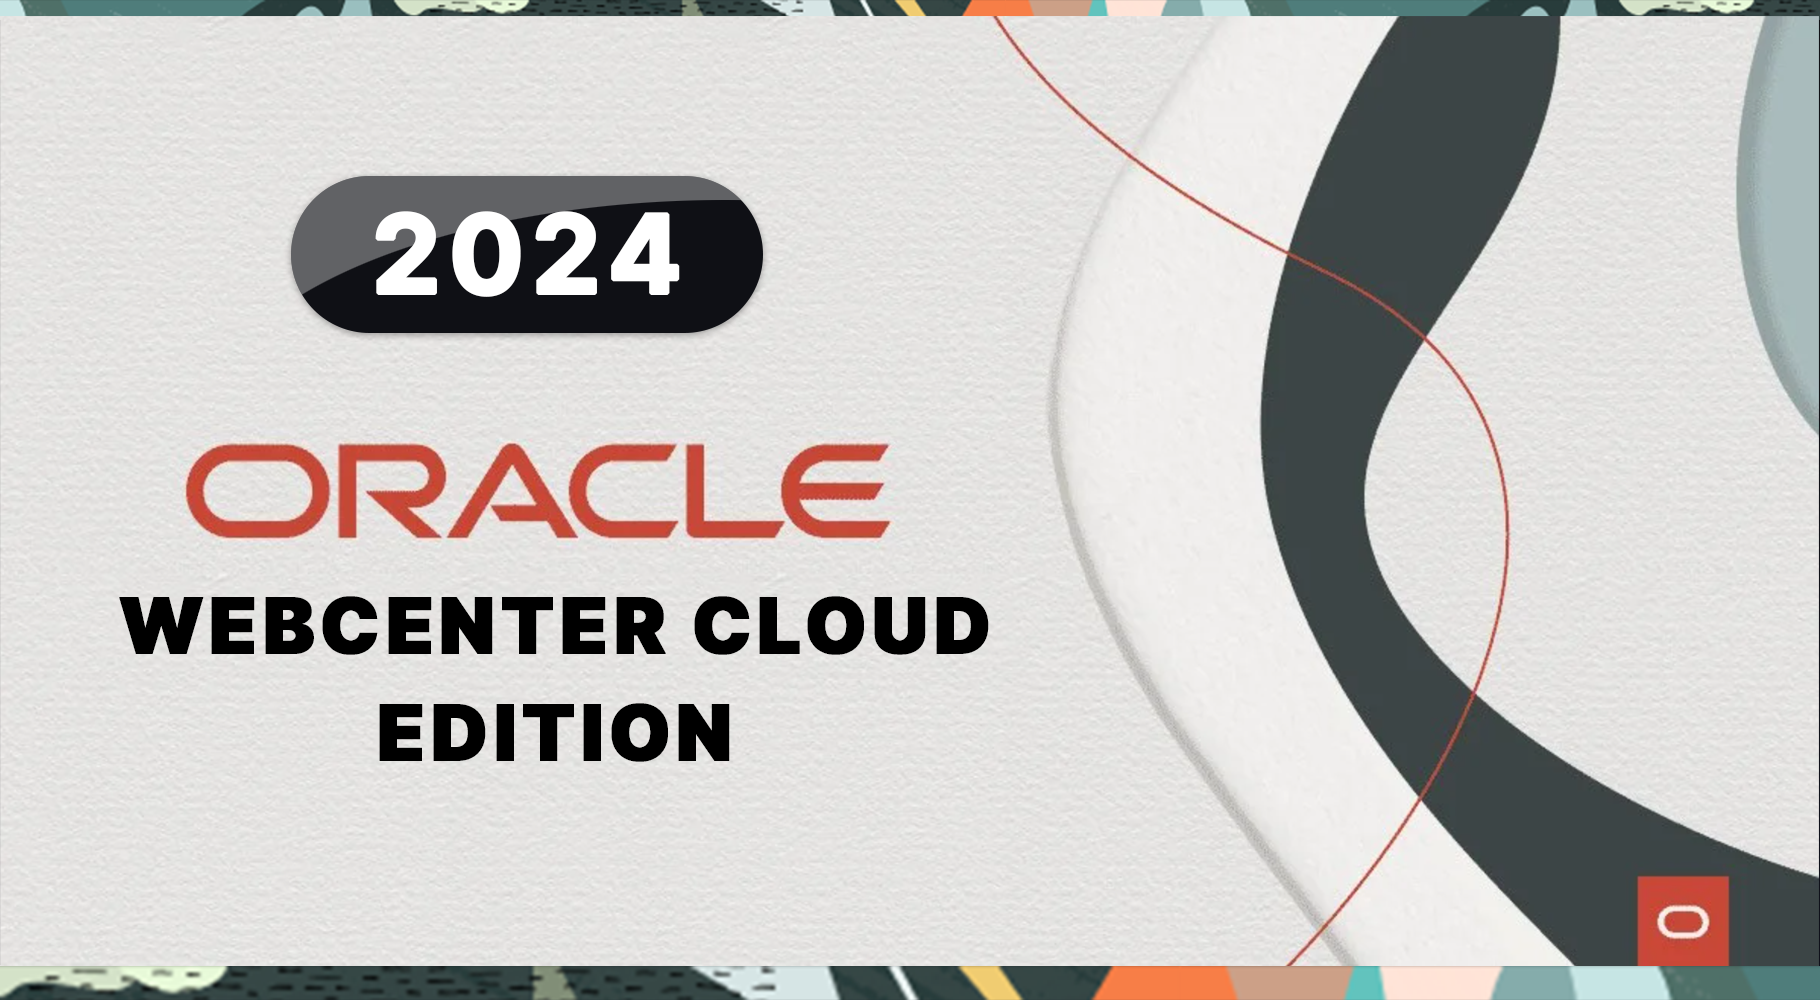 Oracle WebCenter Cloud Edition